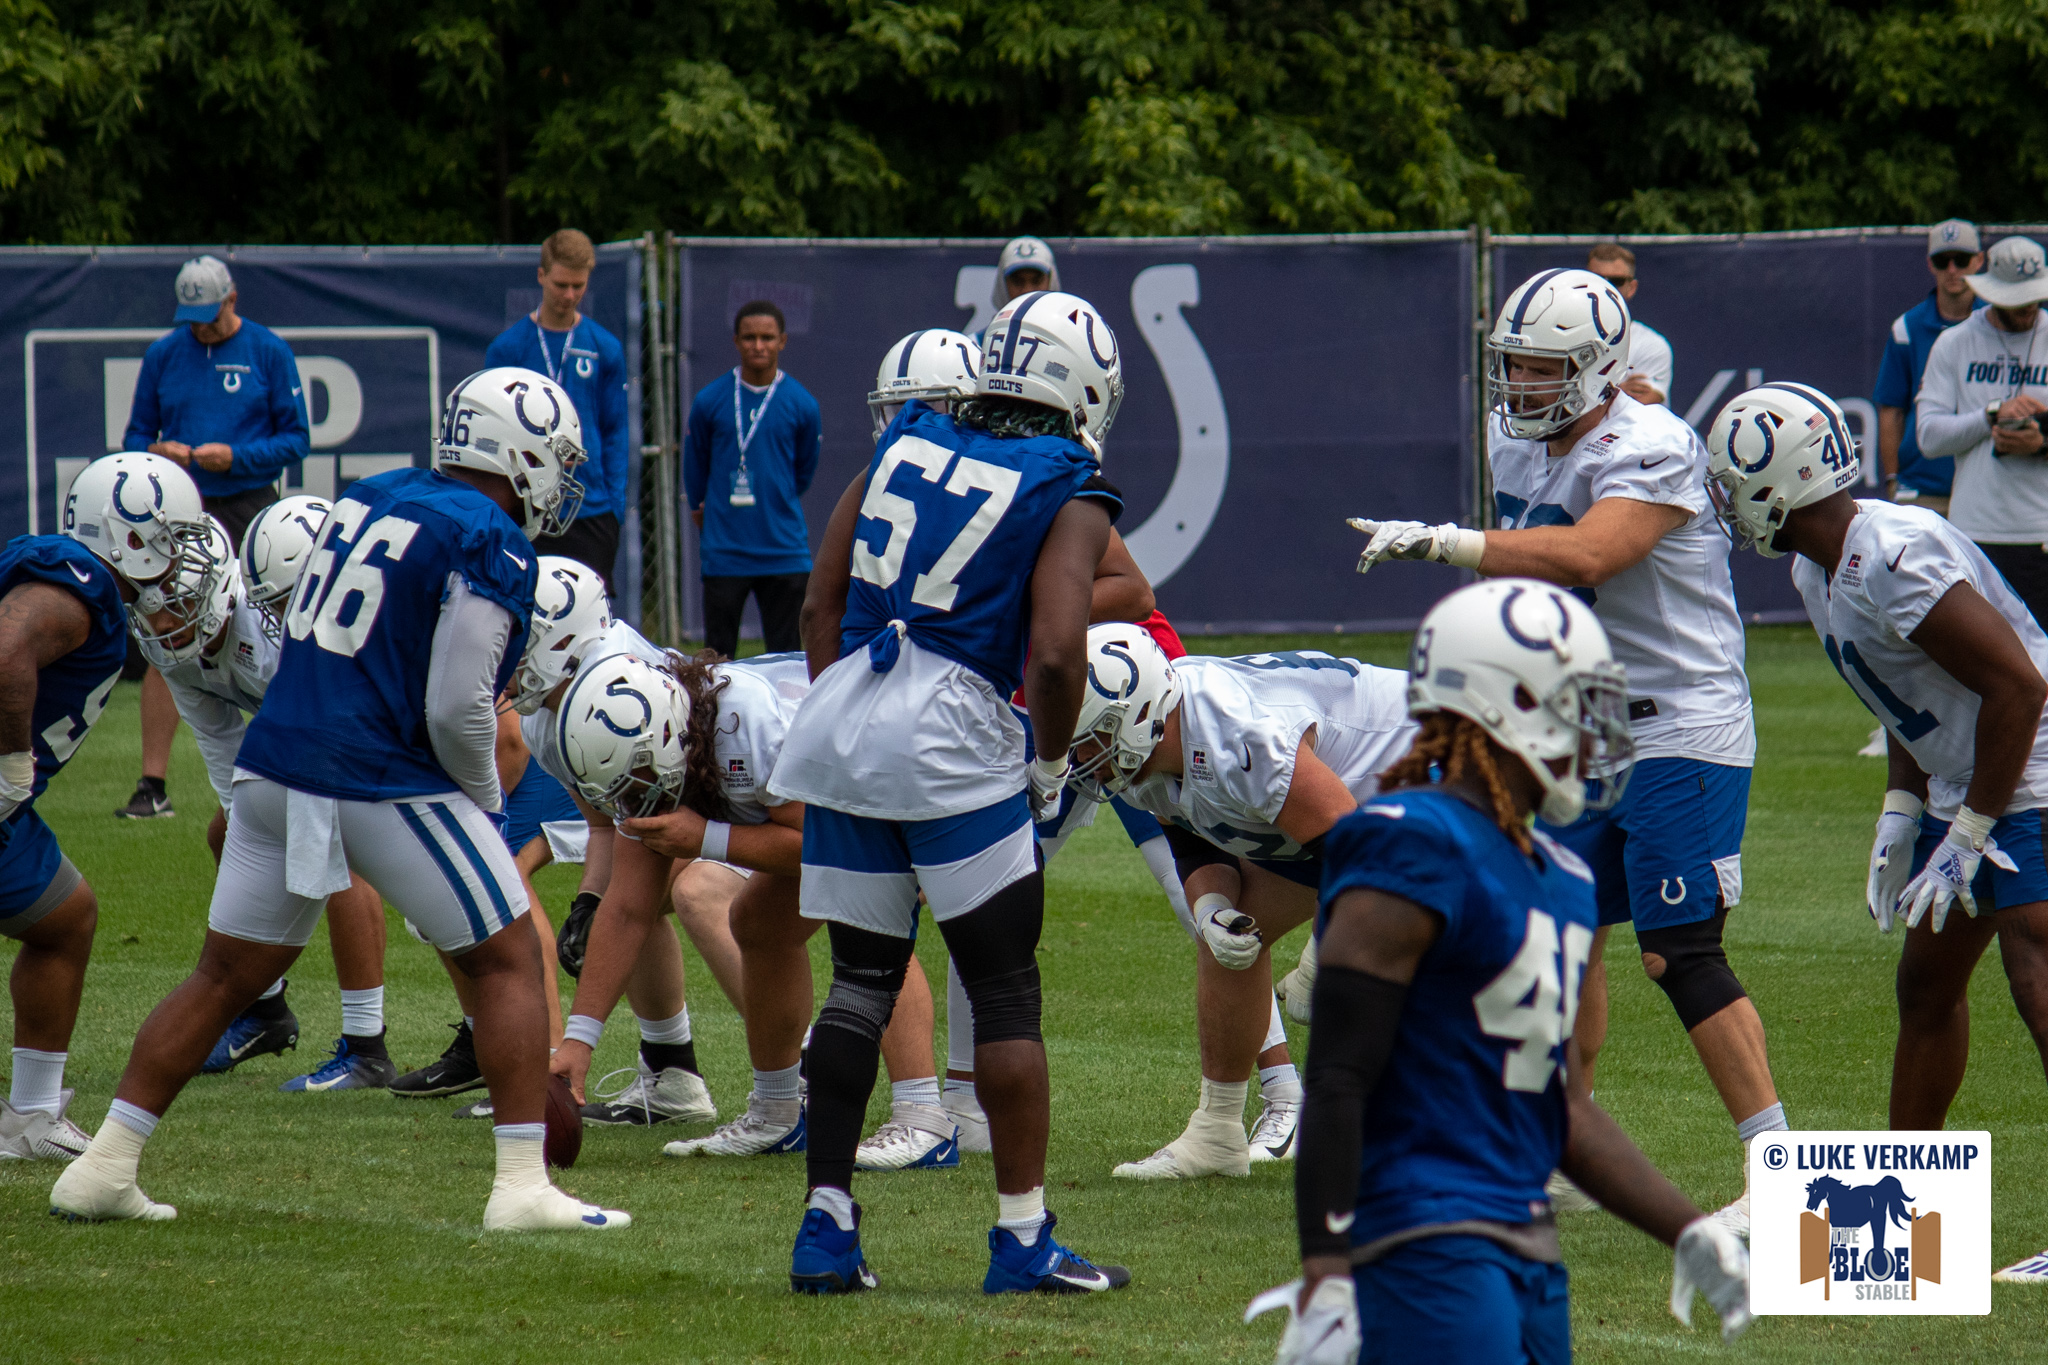 The Seahawks will test the Colts philosophy